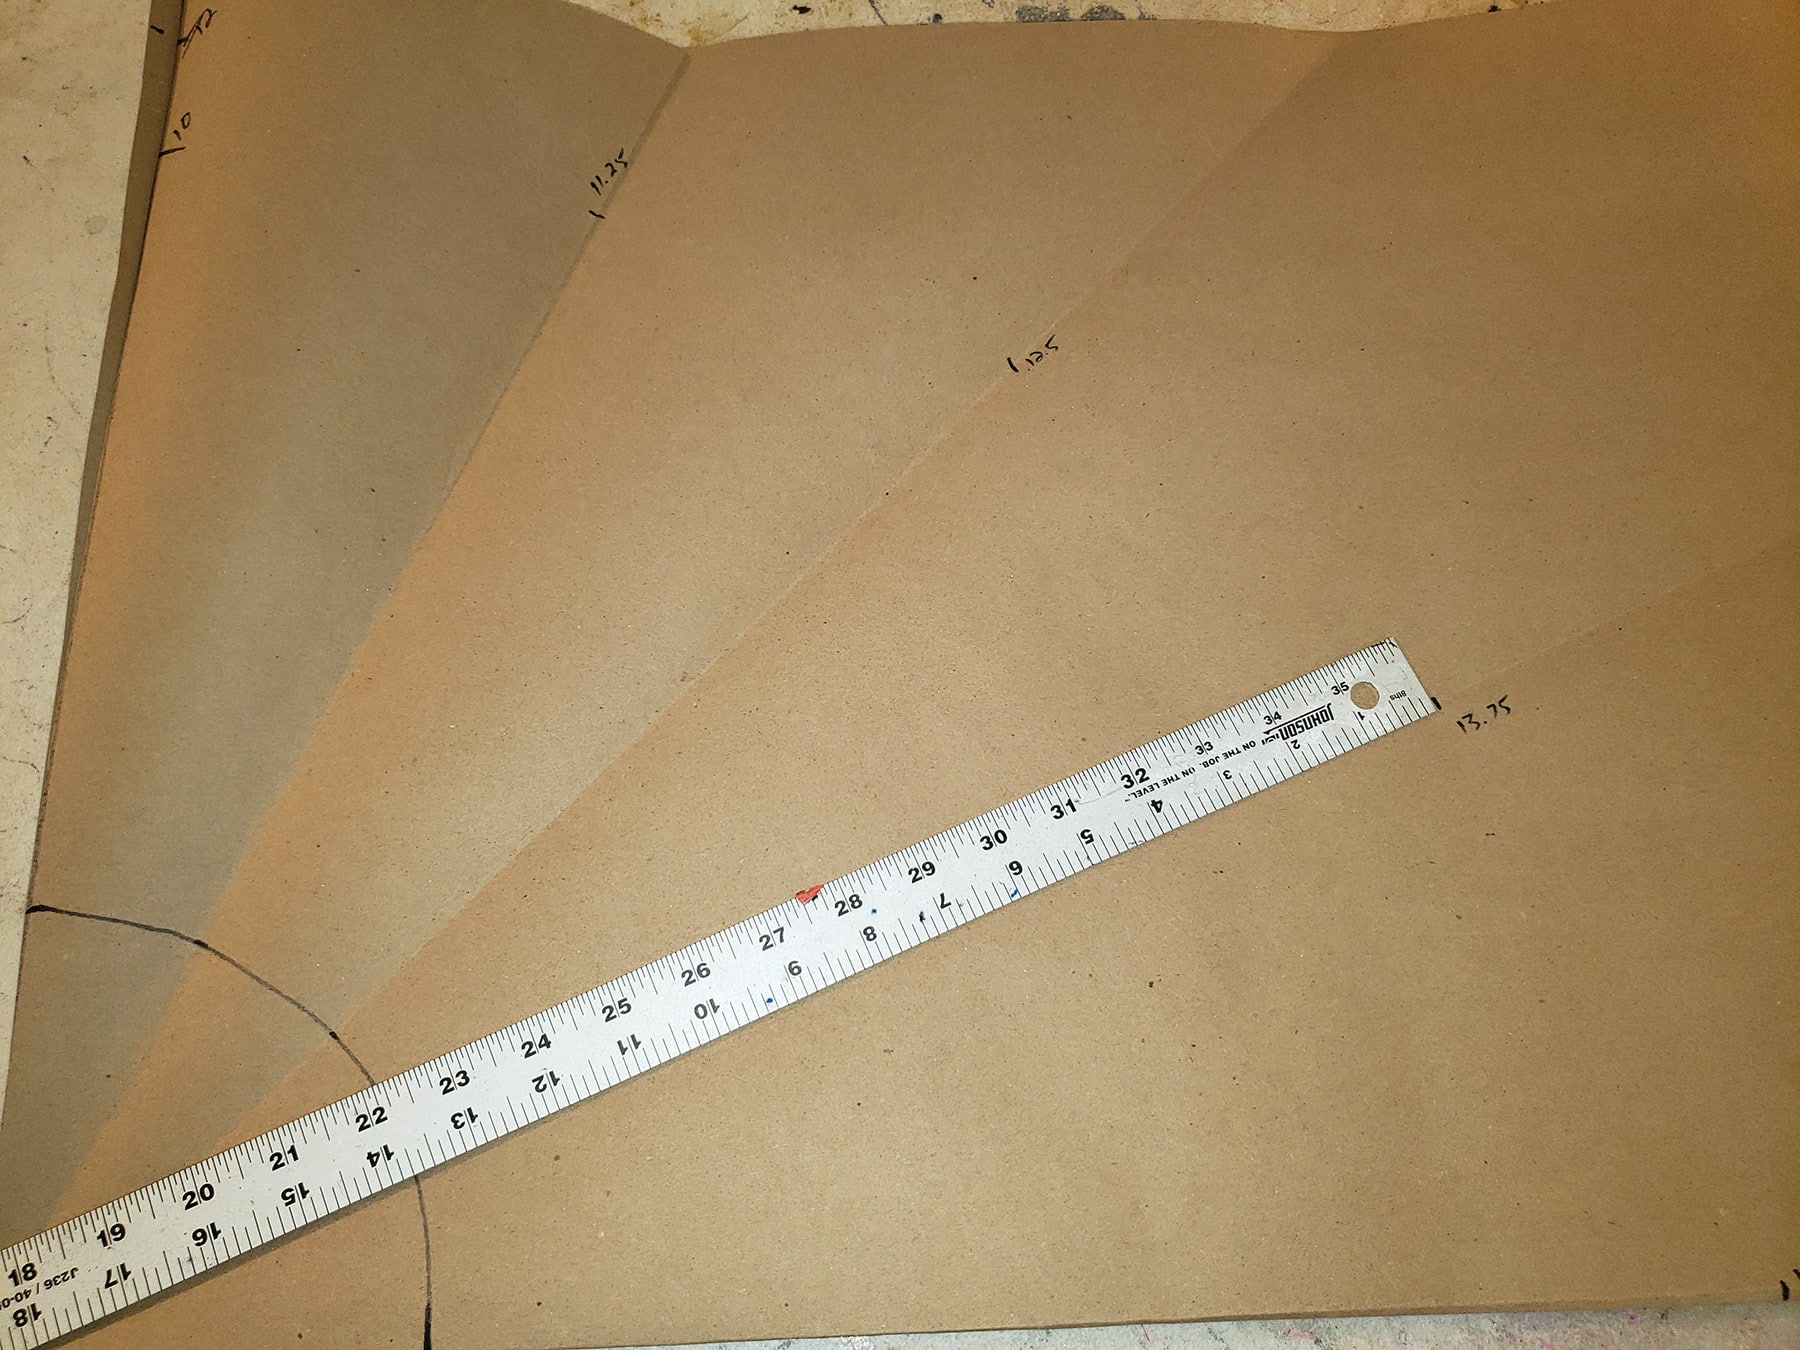 A metal ruler is drafting out a circle skirt pattern on brown craft paper.